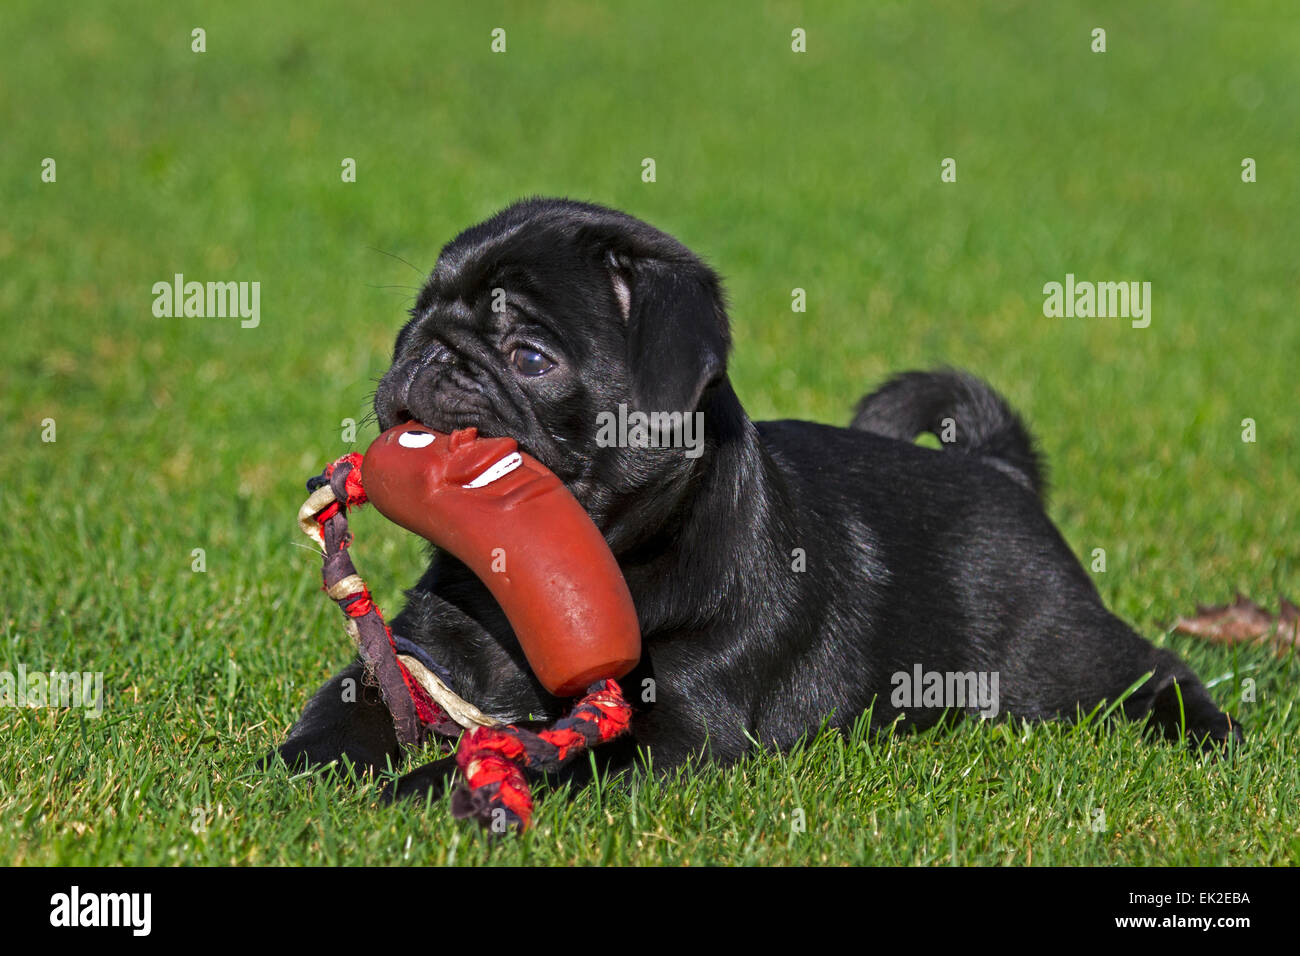 Black young pug with toy Stock Photo